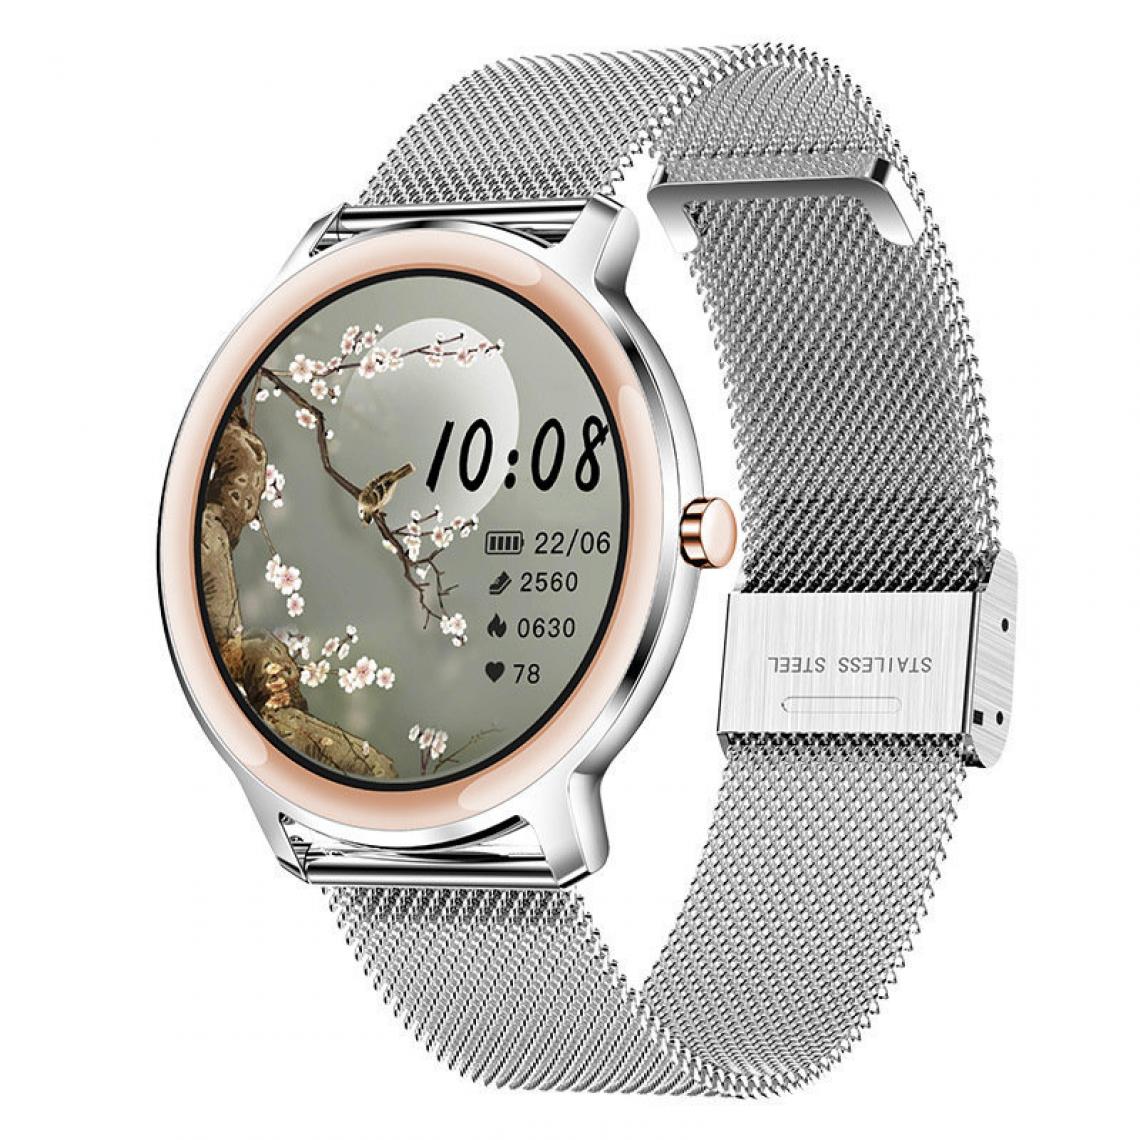 Chronotech Montres - Chronus Smart Watch for Women - Fitness Watch Sports Tracker with Heart Rate Sleep Monitoring Blood Pressure Measurement Message Reminder Pedometer IP67 Waterproof Smart Watches for Android & IOS(silver) - Montre connectée